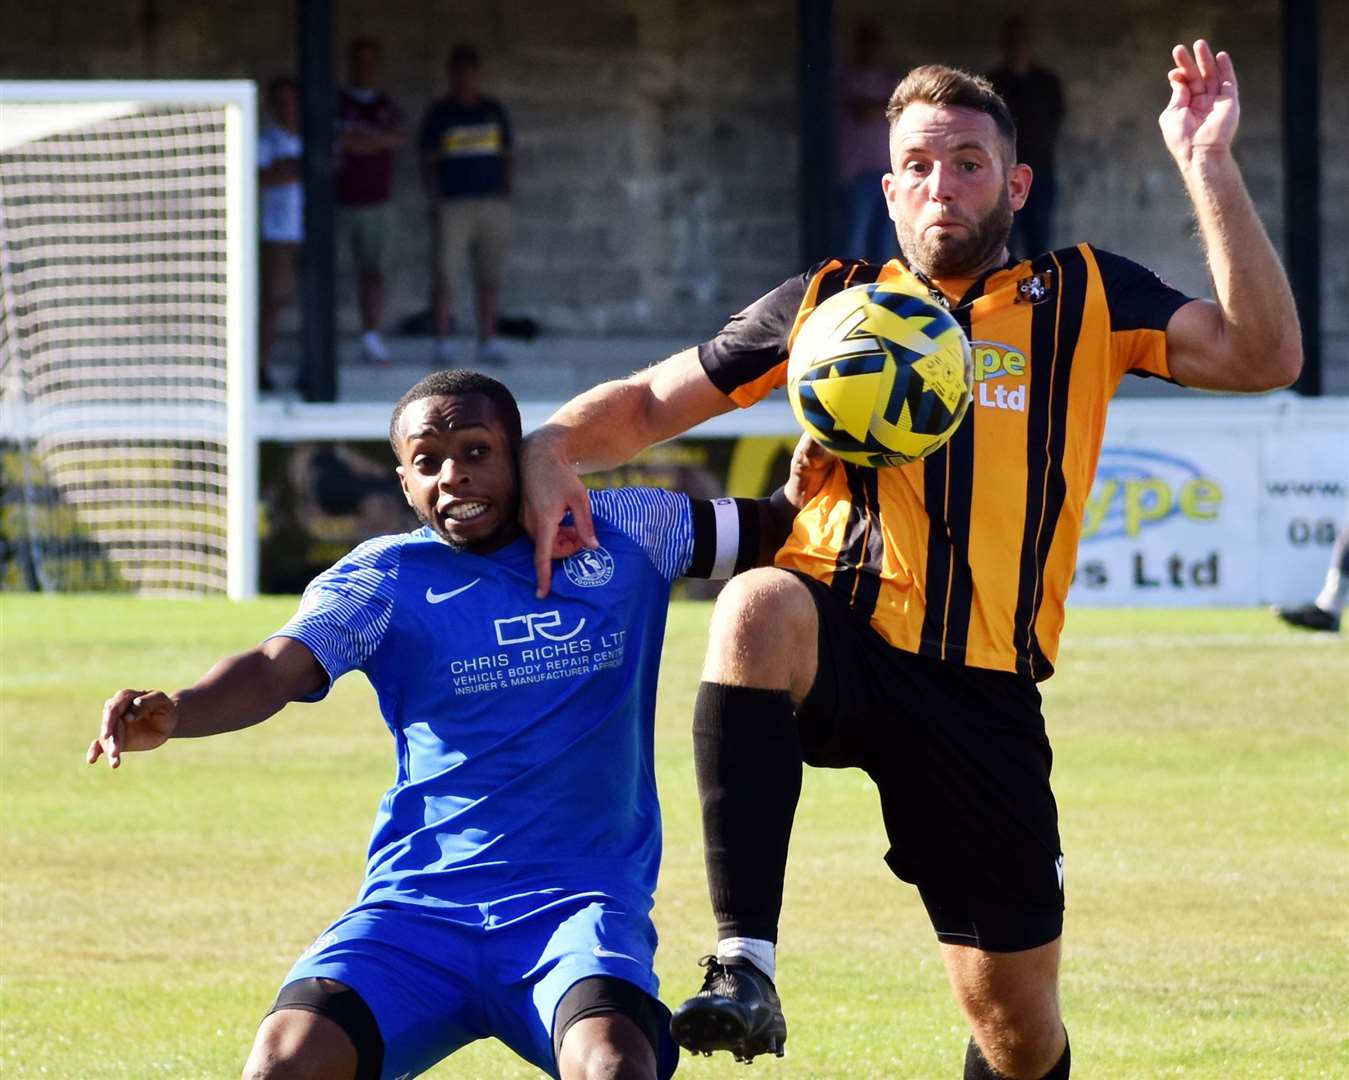 Folkestone's Josh Vincent and Herne Bay's Kieron Campbell battle it out in Bay's 2-1 defeat at Cheriton Road. Picture: Randolph File